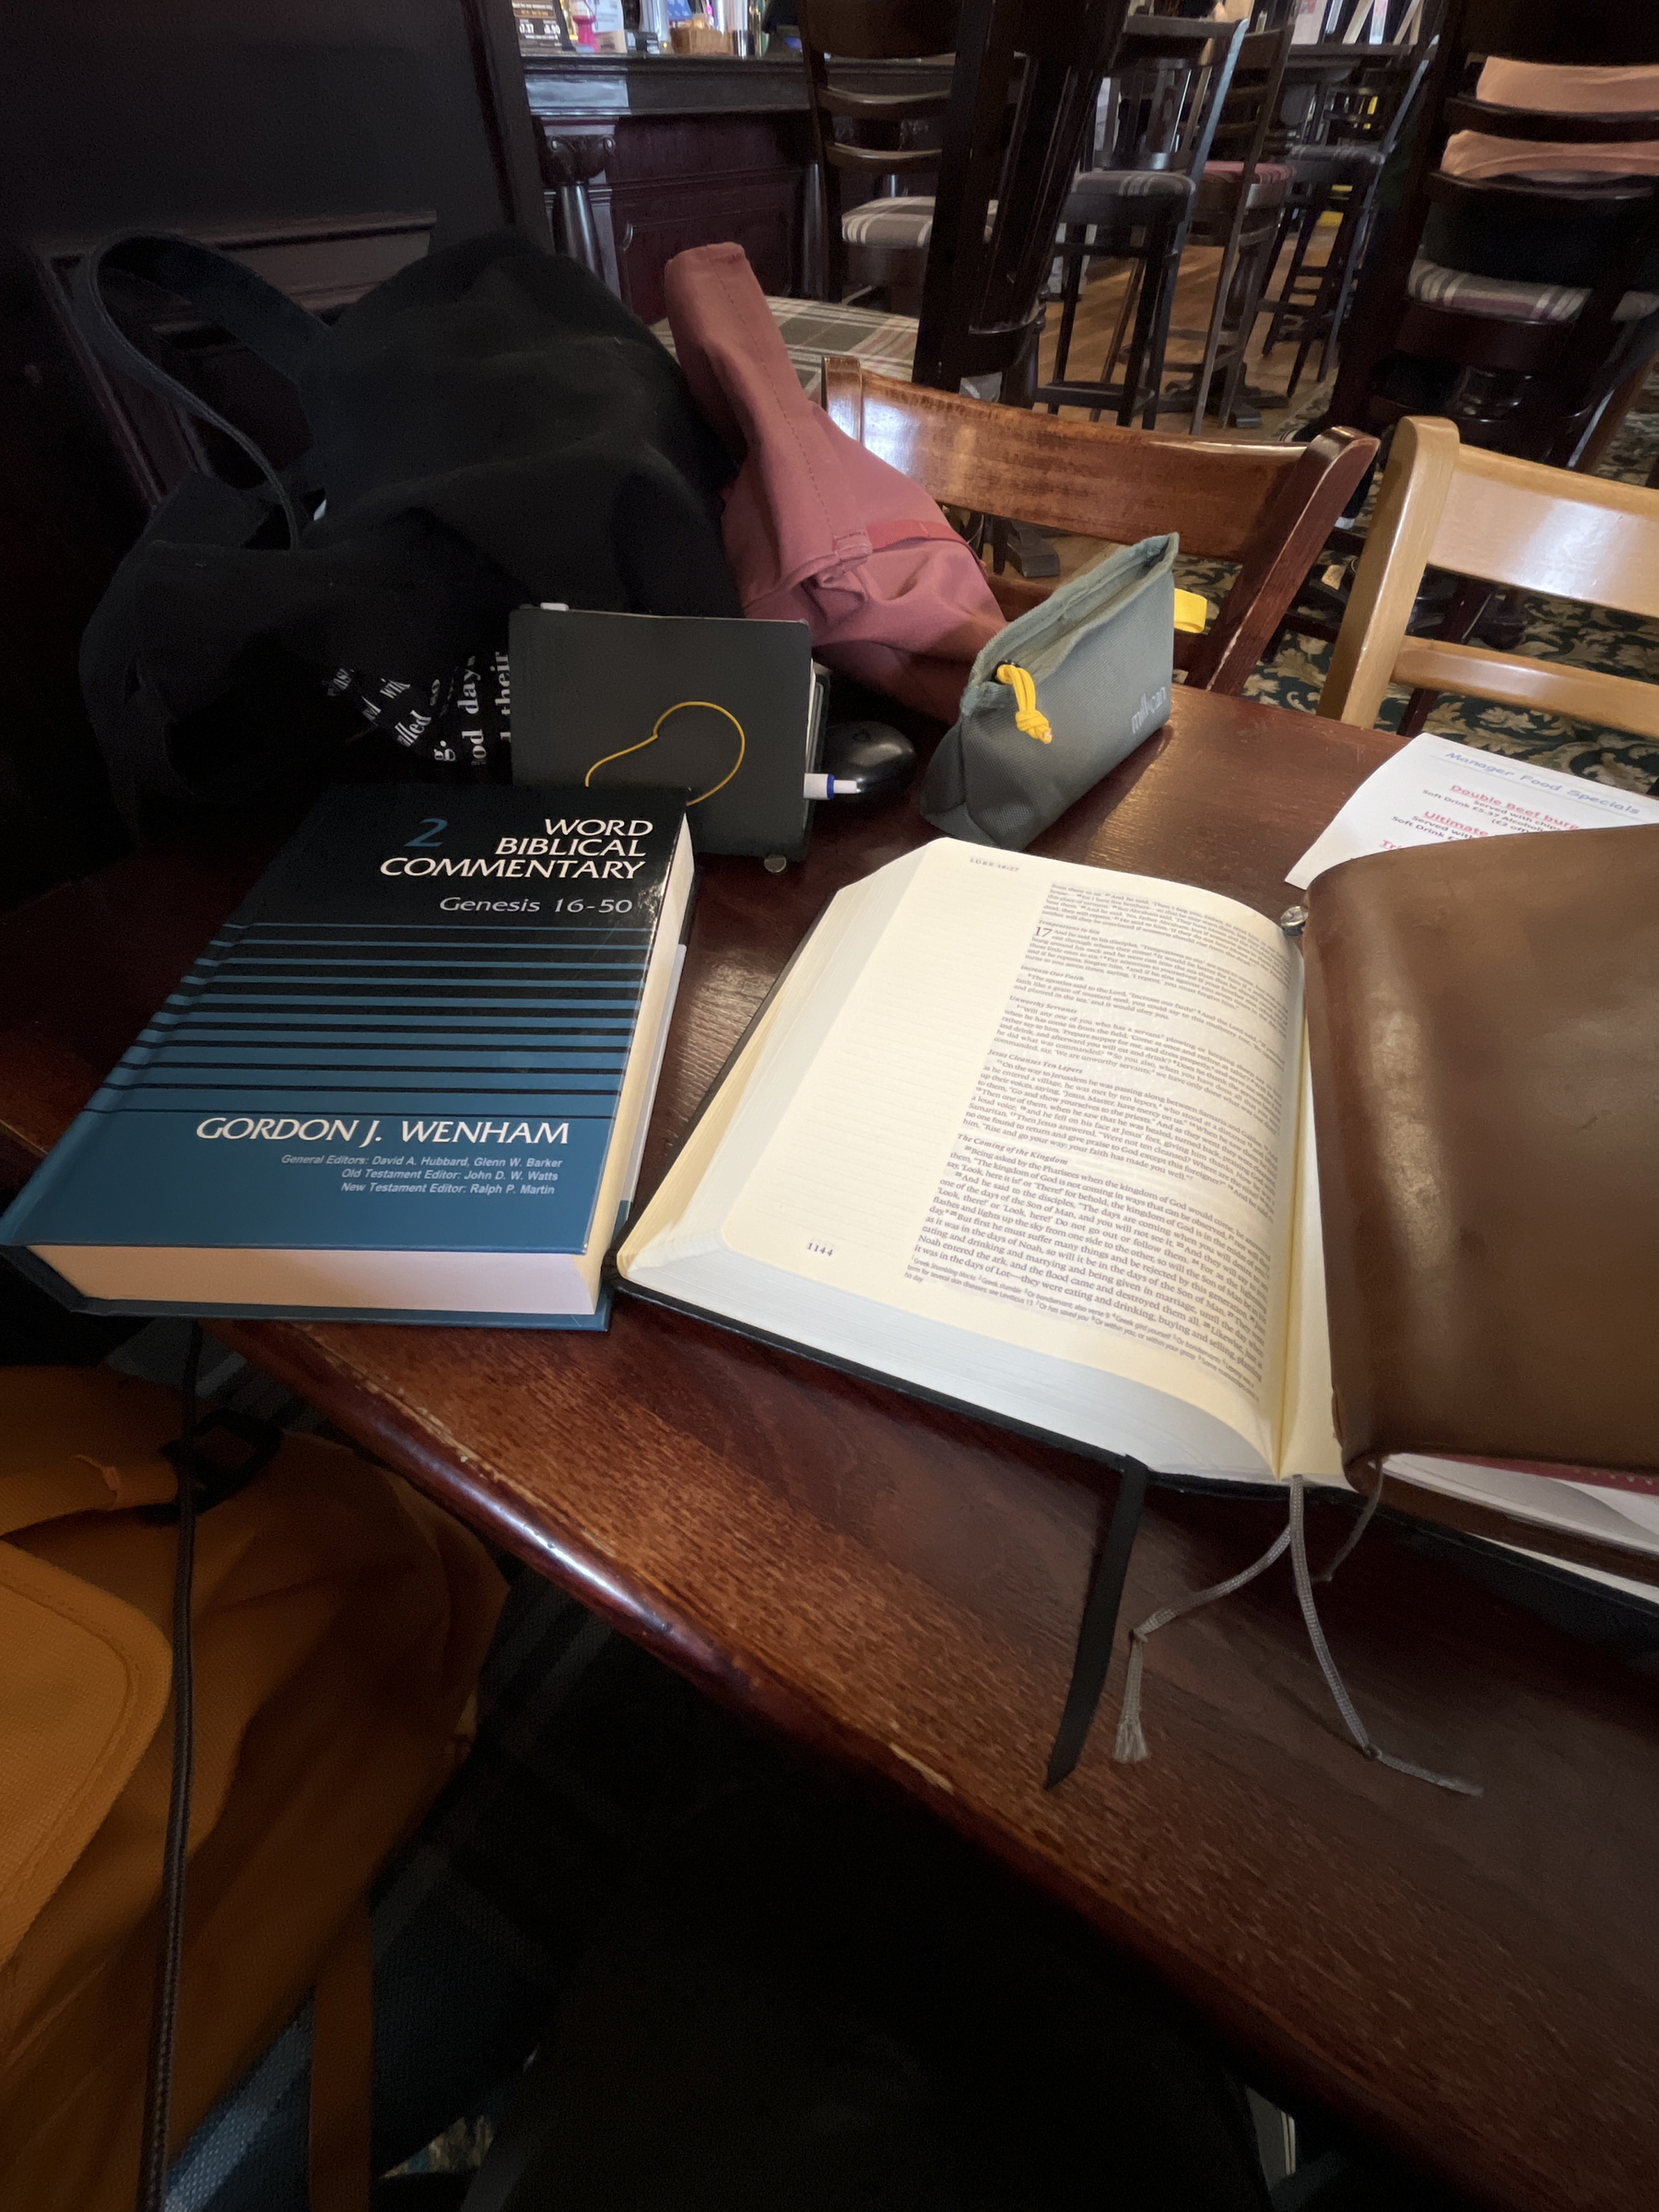 A pub table covered with books (the Bible and Gordon Wenham’s commentary on Genesis) and notebooks (Traveler’s Notebook in camel brown).